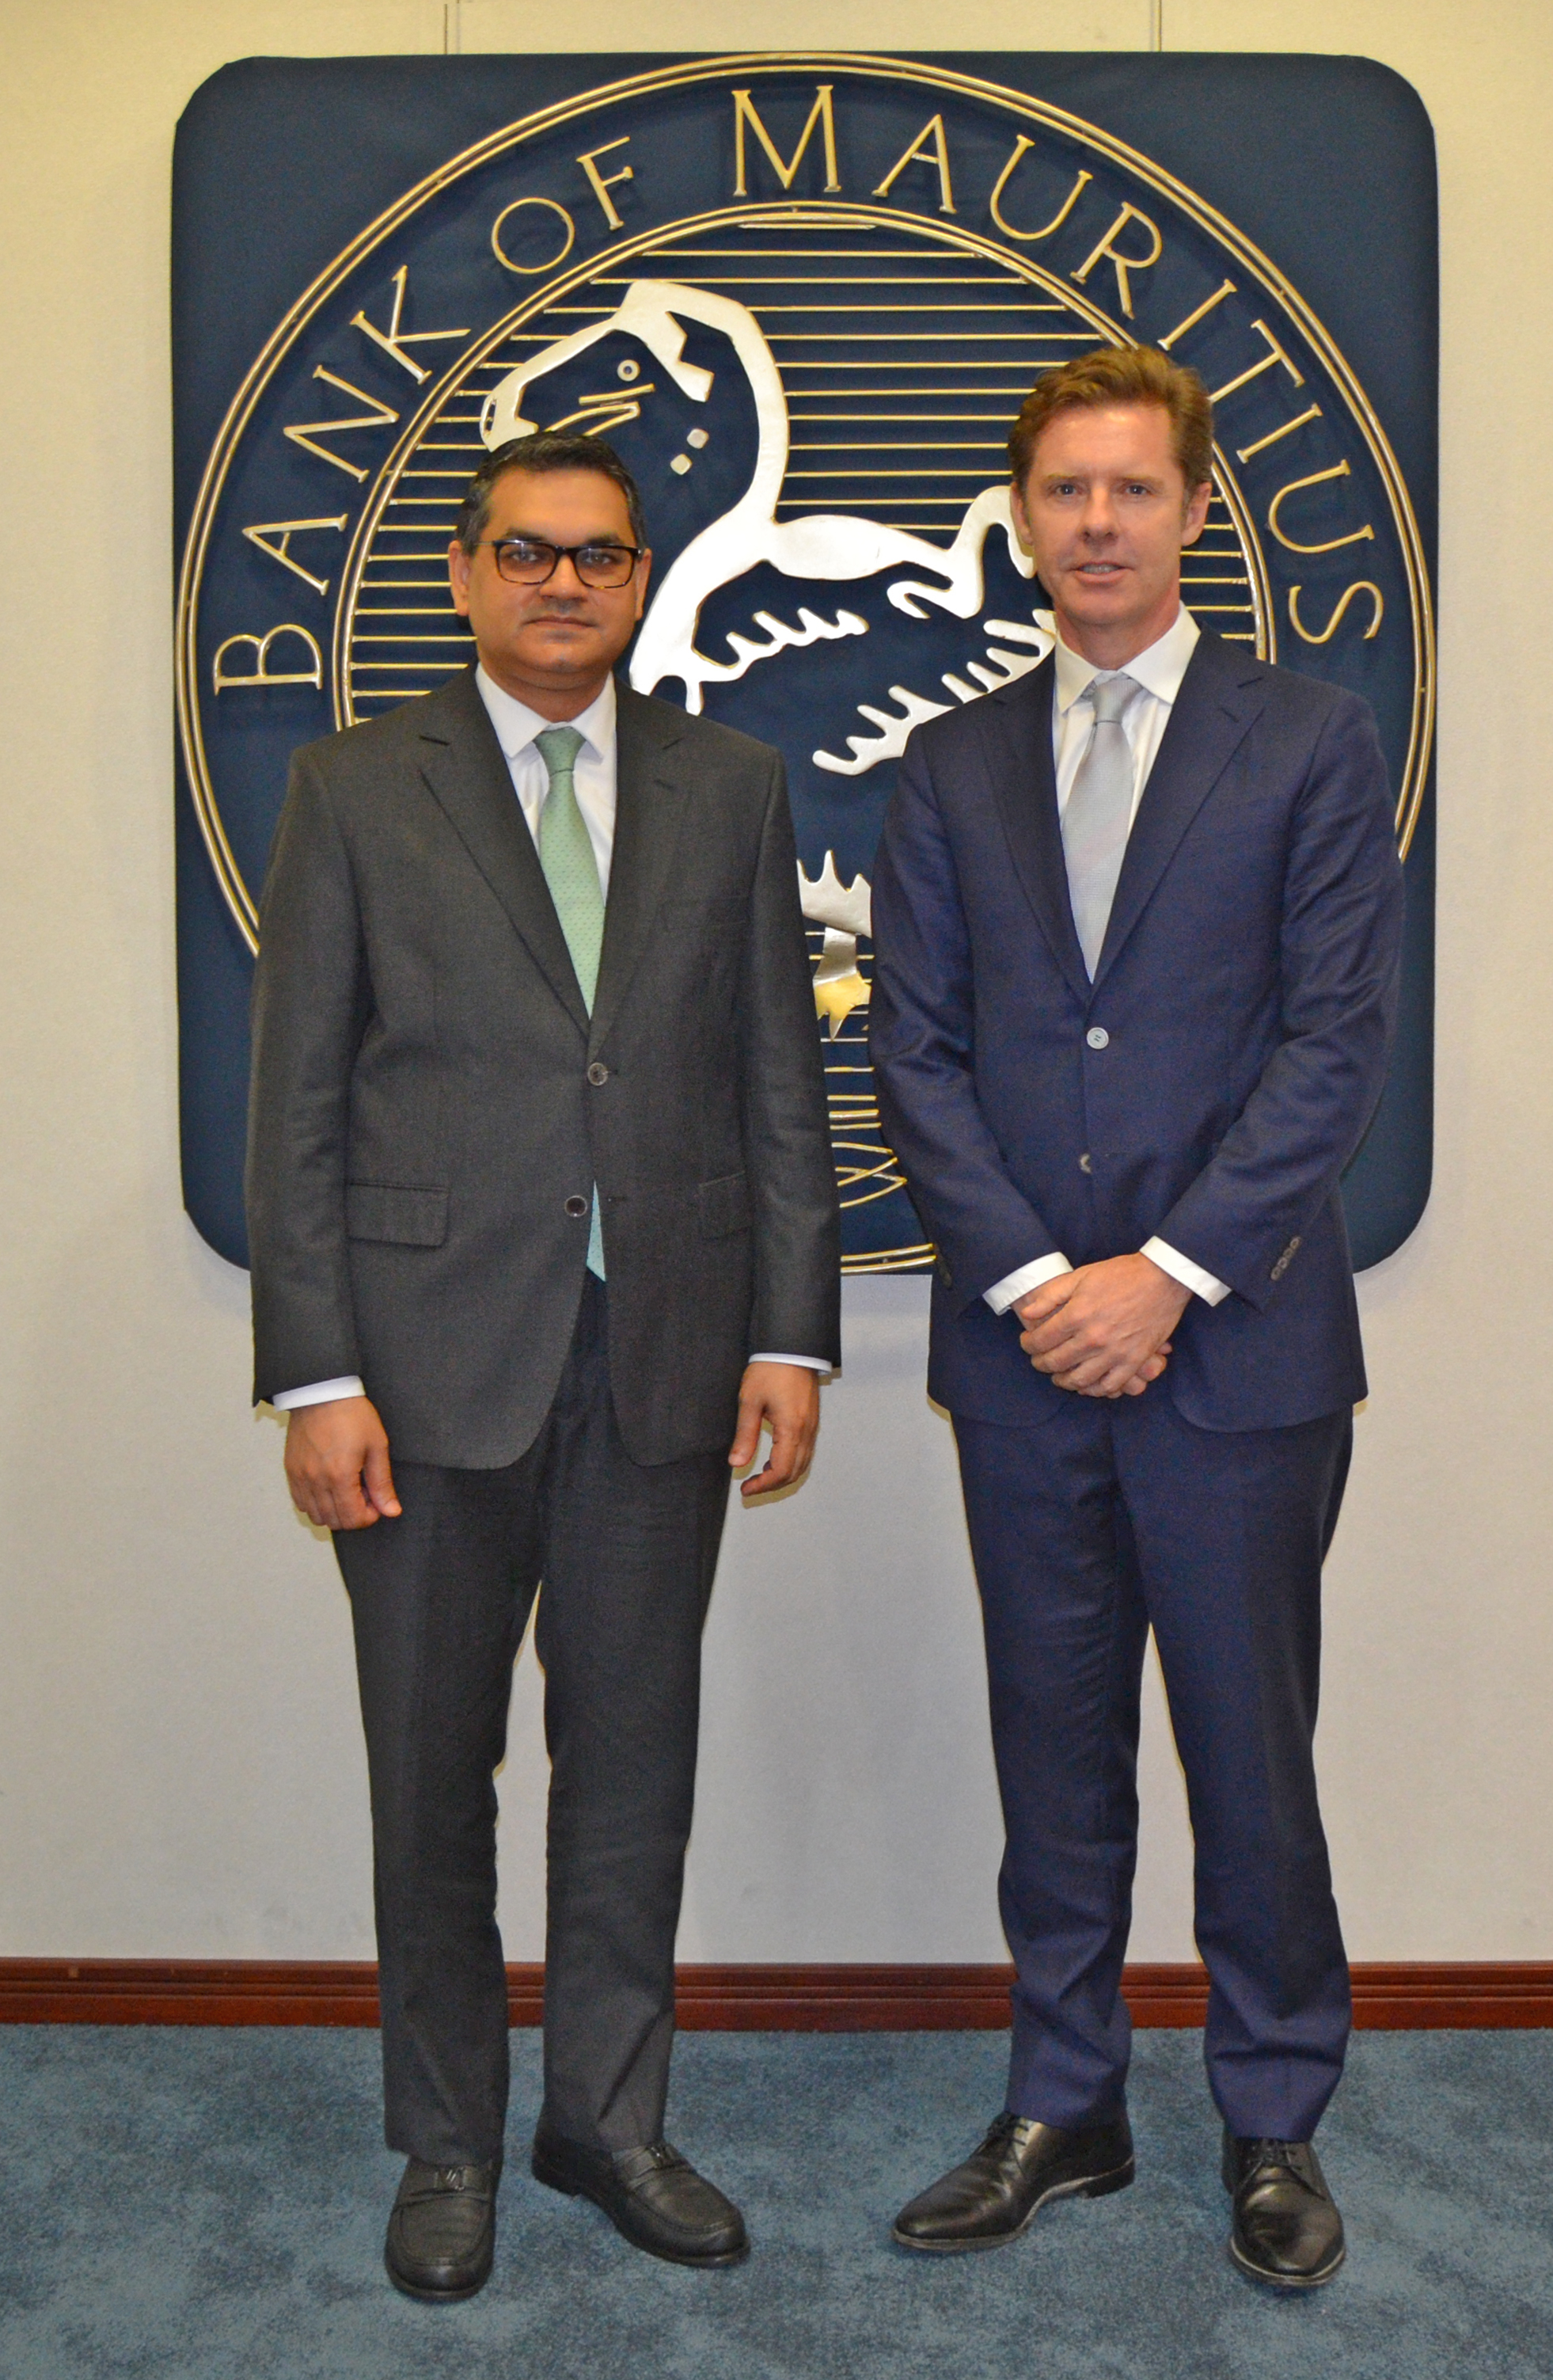 Mark Elliott, Division President for Sub-Saharan Africa at Mastercard (right) paid a courtesy visit to Harvesh Kumar Seegolam, Governor of the Bank of Mauritius (left), during his visit to Mauritius for the inauguration of Mastercard's new office in Port Louis.